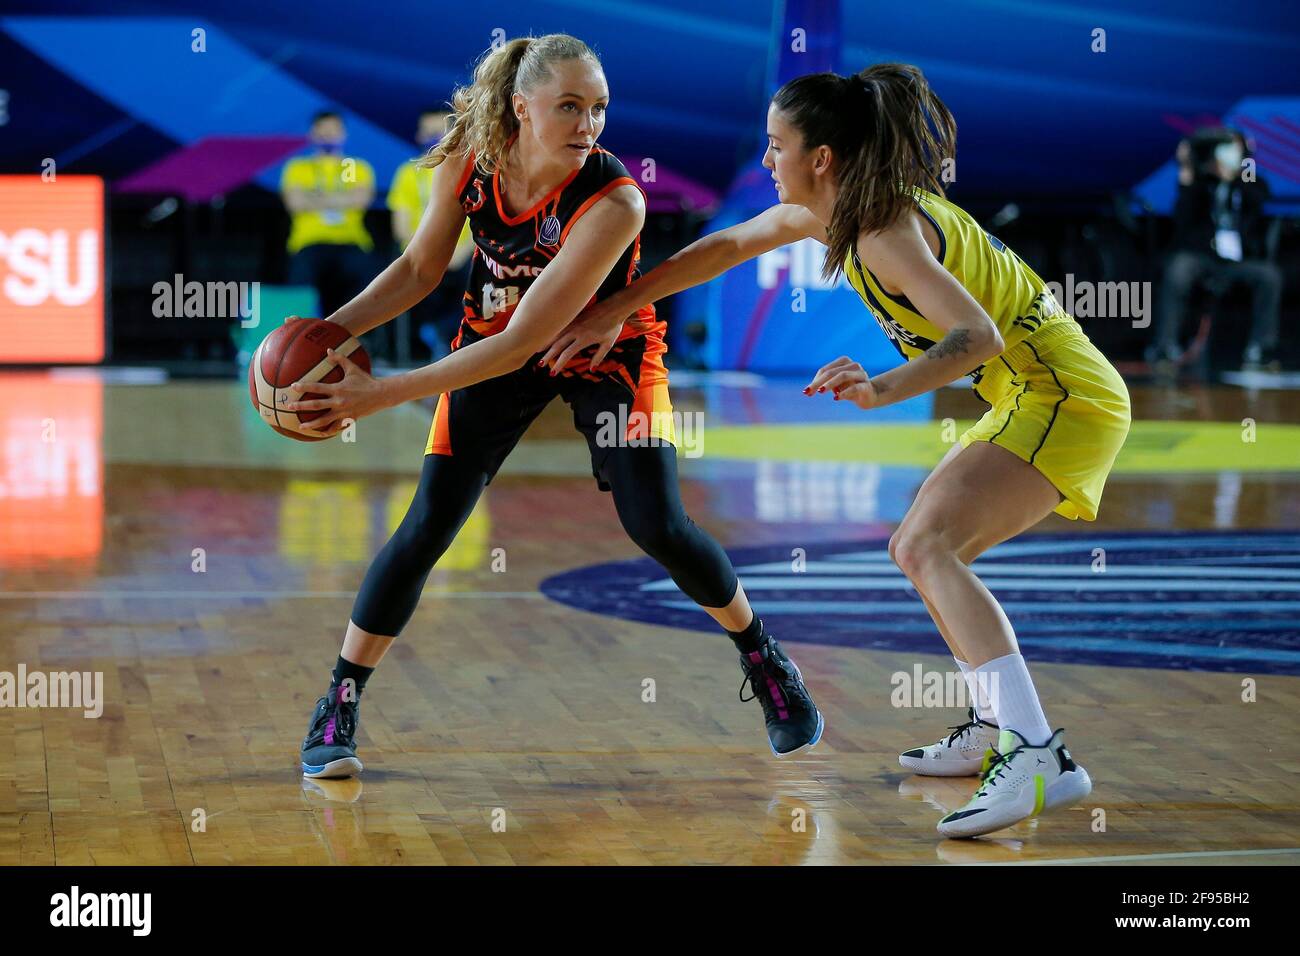 ISTANBUL, Turkey. 16th Apr, 2021: Basketbal: Fenerbahce Oznur Kablo v UMMC Ekaterinburg: Istanboel ISTANBUL, Turkey. 16th Apr, 2021. APRIL 16: Elena Beglova of UMMC Ekaterinburg during the Euroleague Women Final Four match between Fenerbahce Oznur Kablo and UMMC Ekaterinburg at Volkswagen Arena on April 16, 2021 in Istanbul, Turkey (Photo by /Orange Pictures) Credit: Orange Pics BV/Alamy Live News Stock Photo